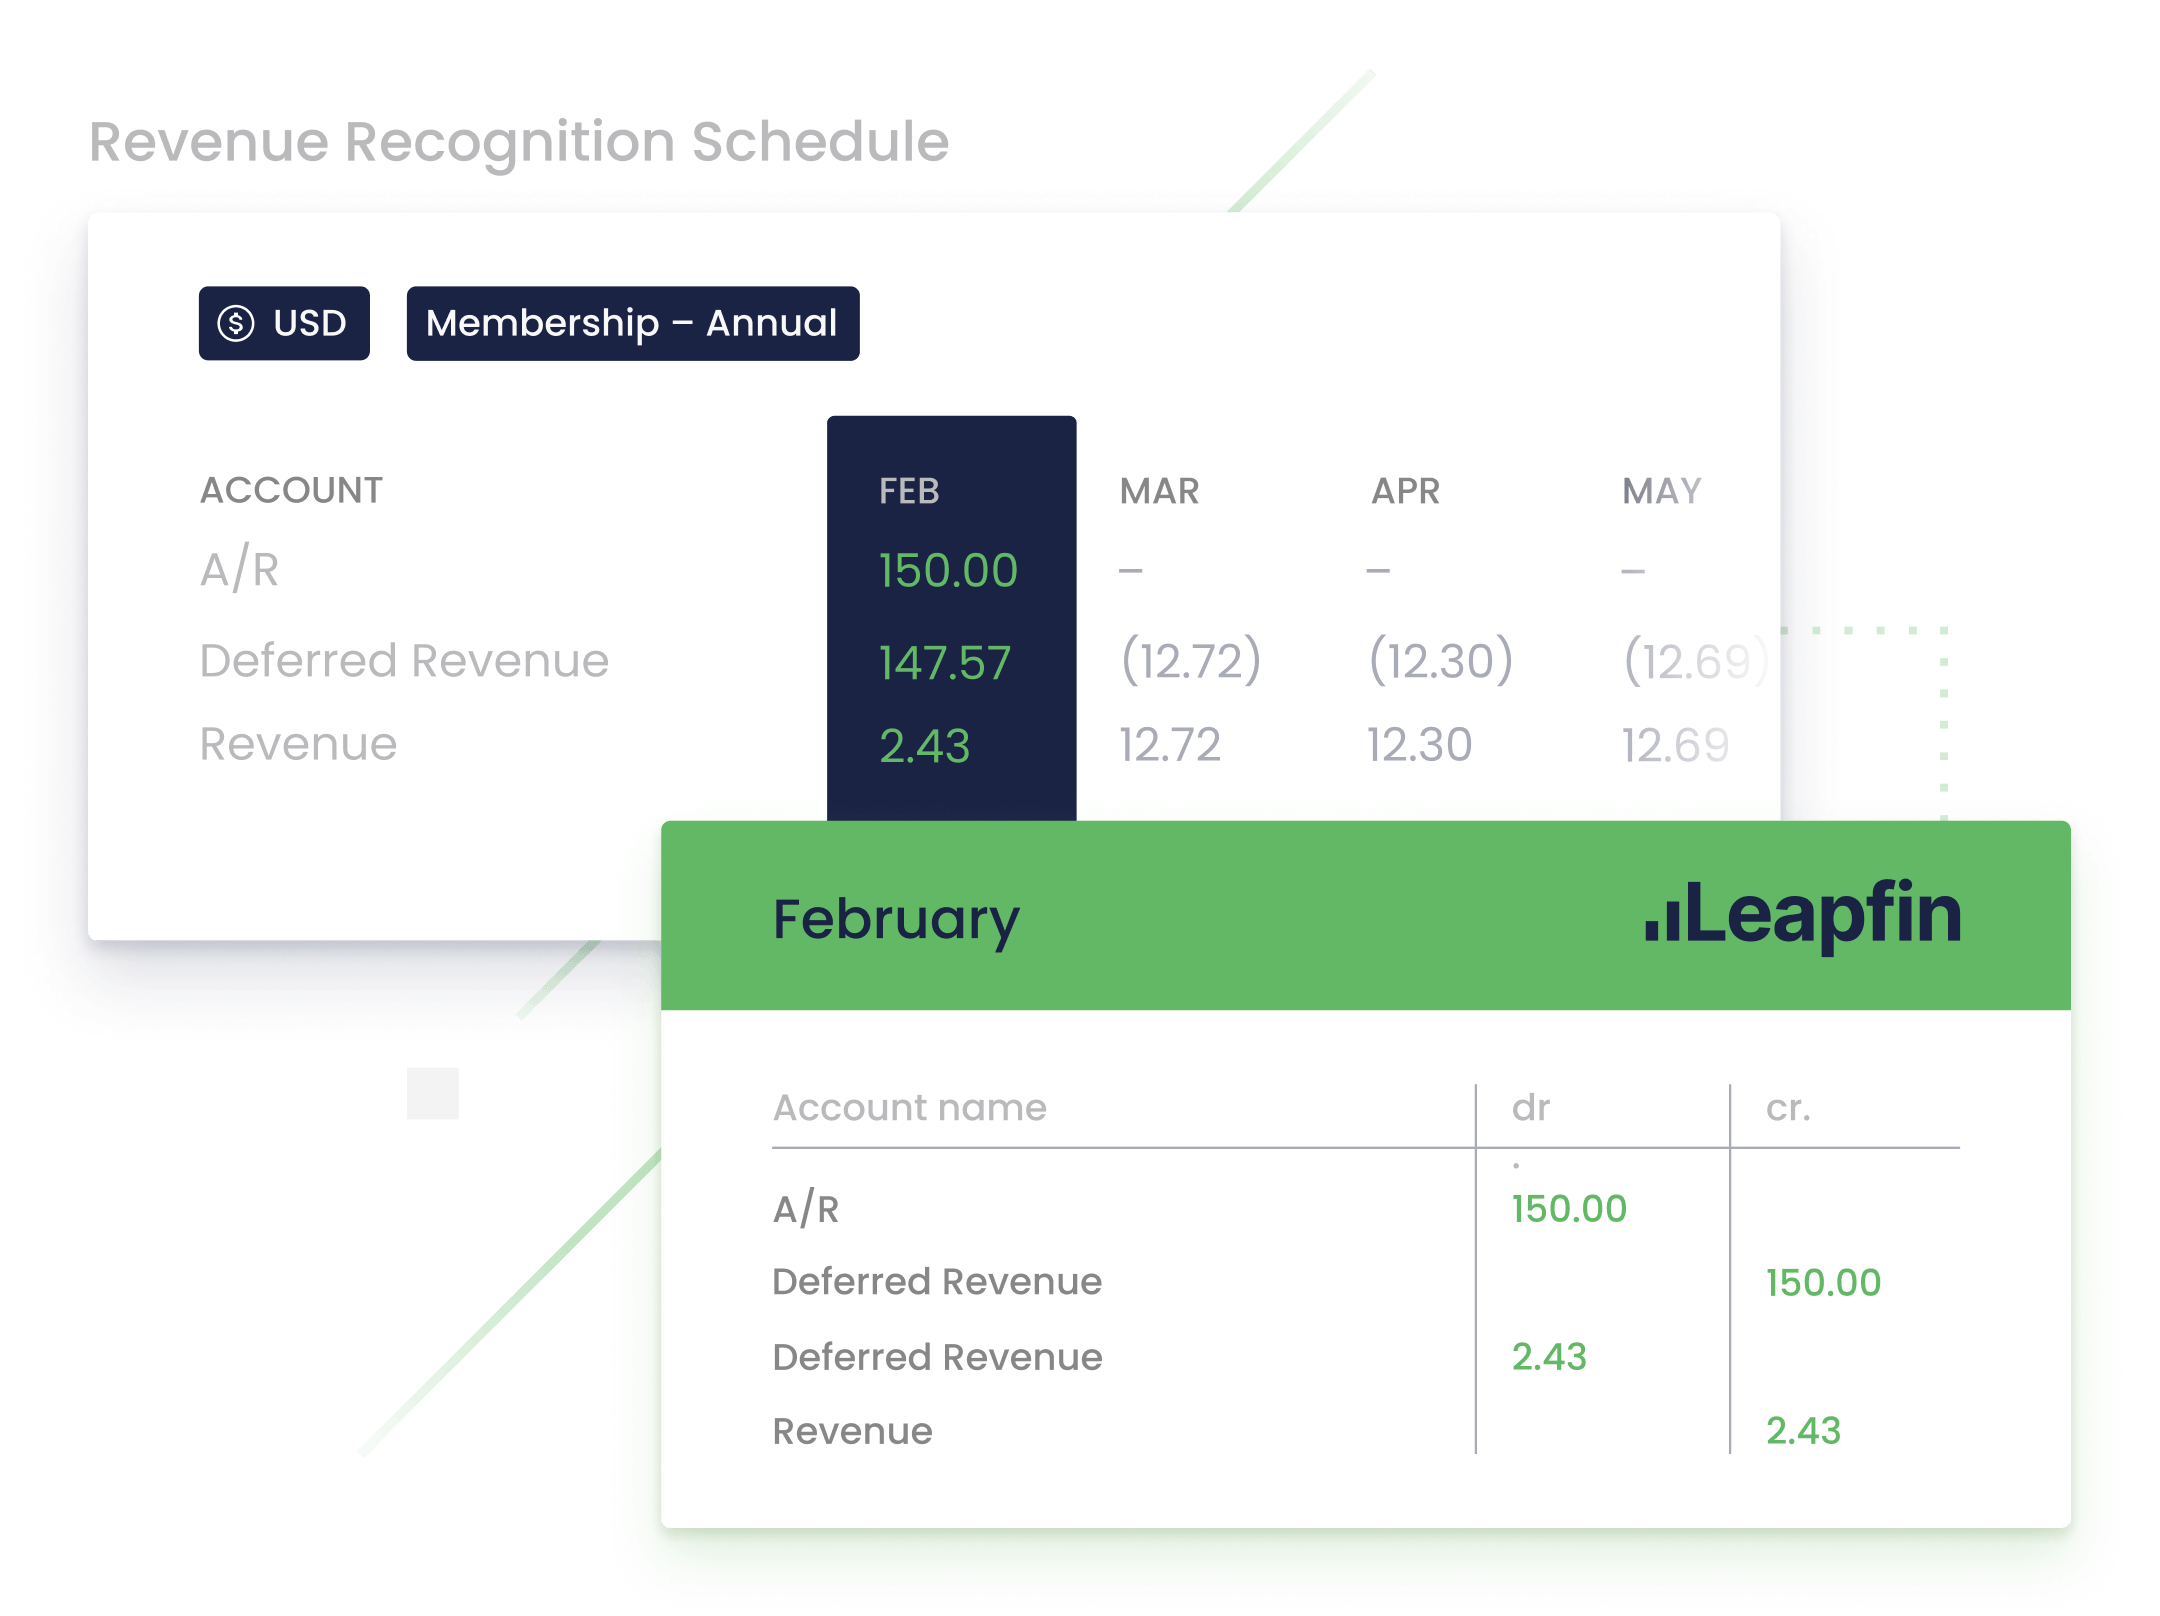 Leapfin allows you to segment and filter your transaction data based on underlying data (e.g. membership type, region, subsidiary, or product for better analysis).